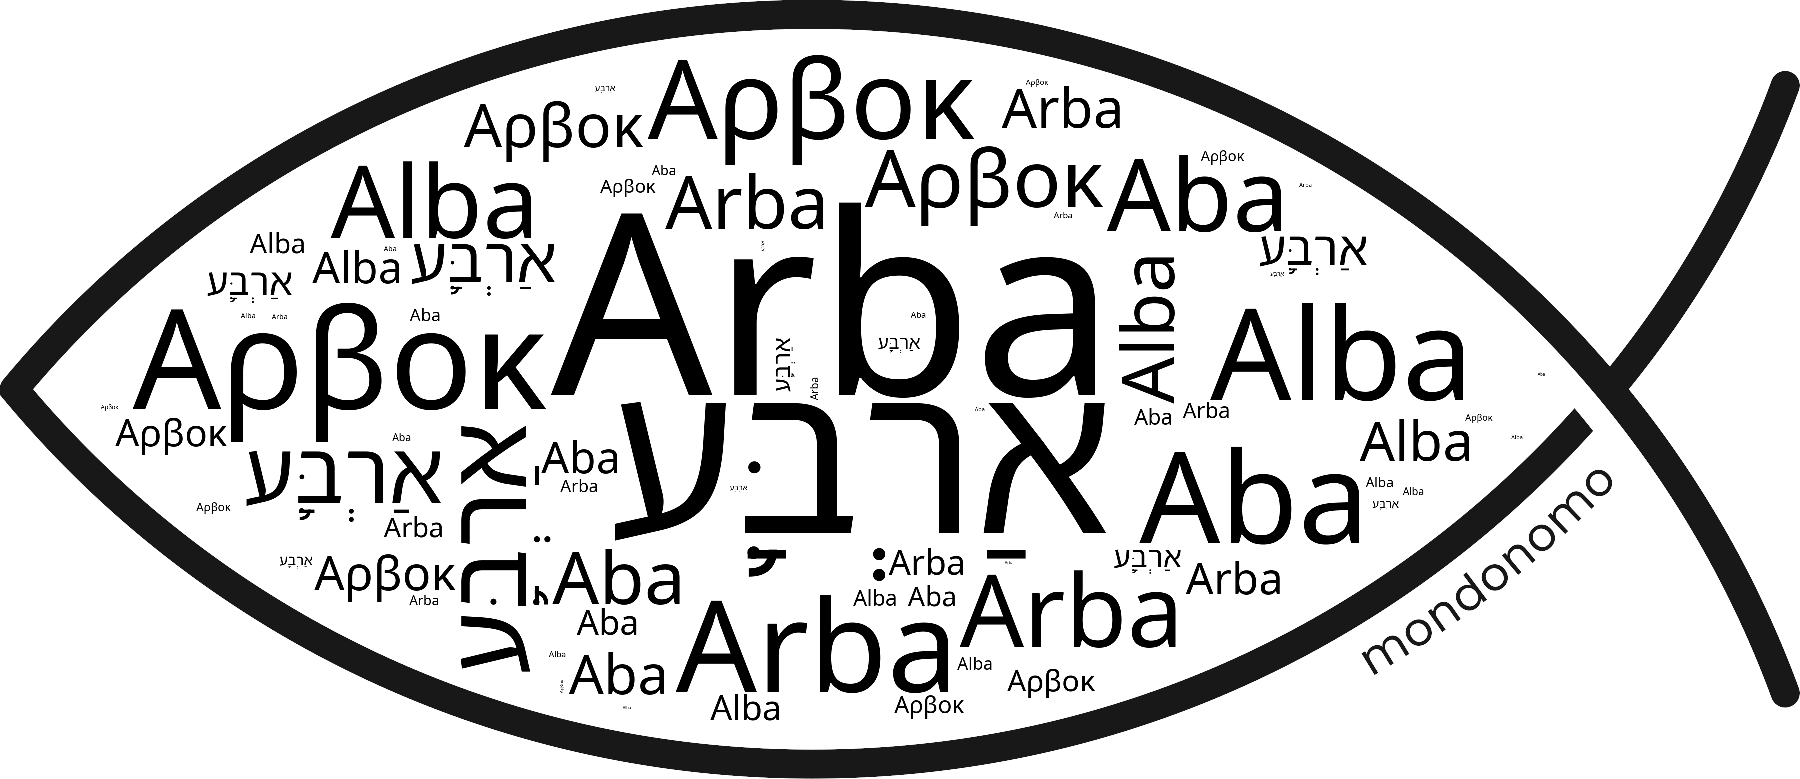 Name Arba in the world's Bibles